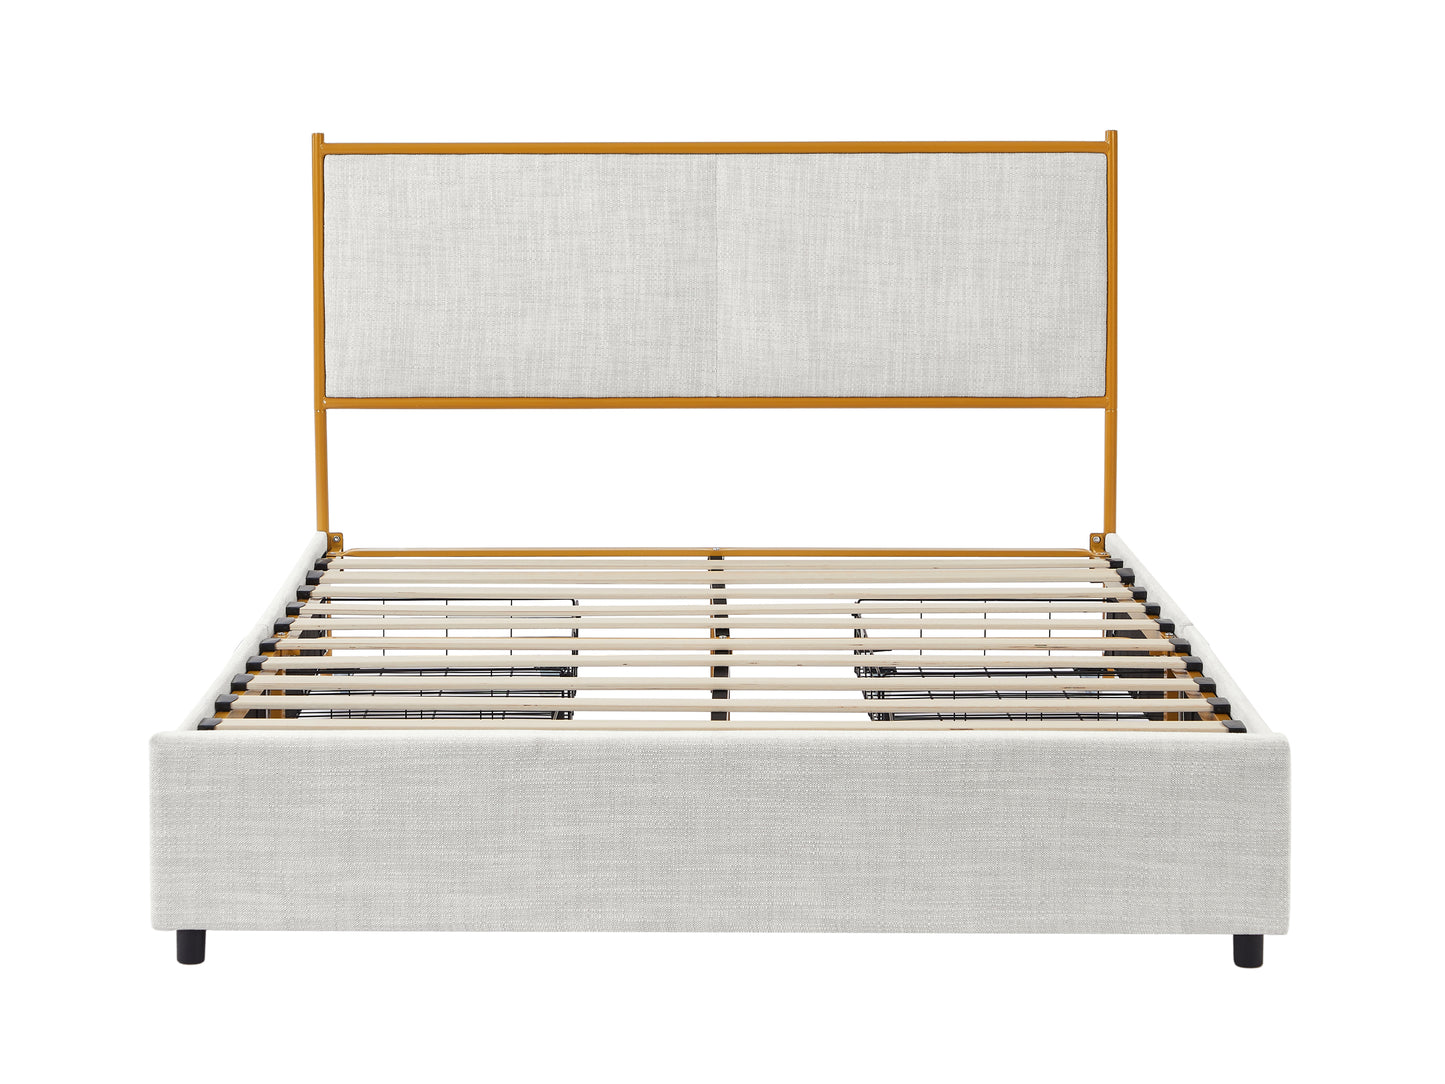 Queen size Upholstered Platform Bed with 4 Storage Drawers, Classic Steamed Bread Shaped Backrest, Light Gray